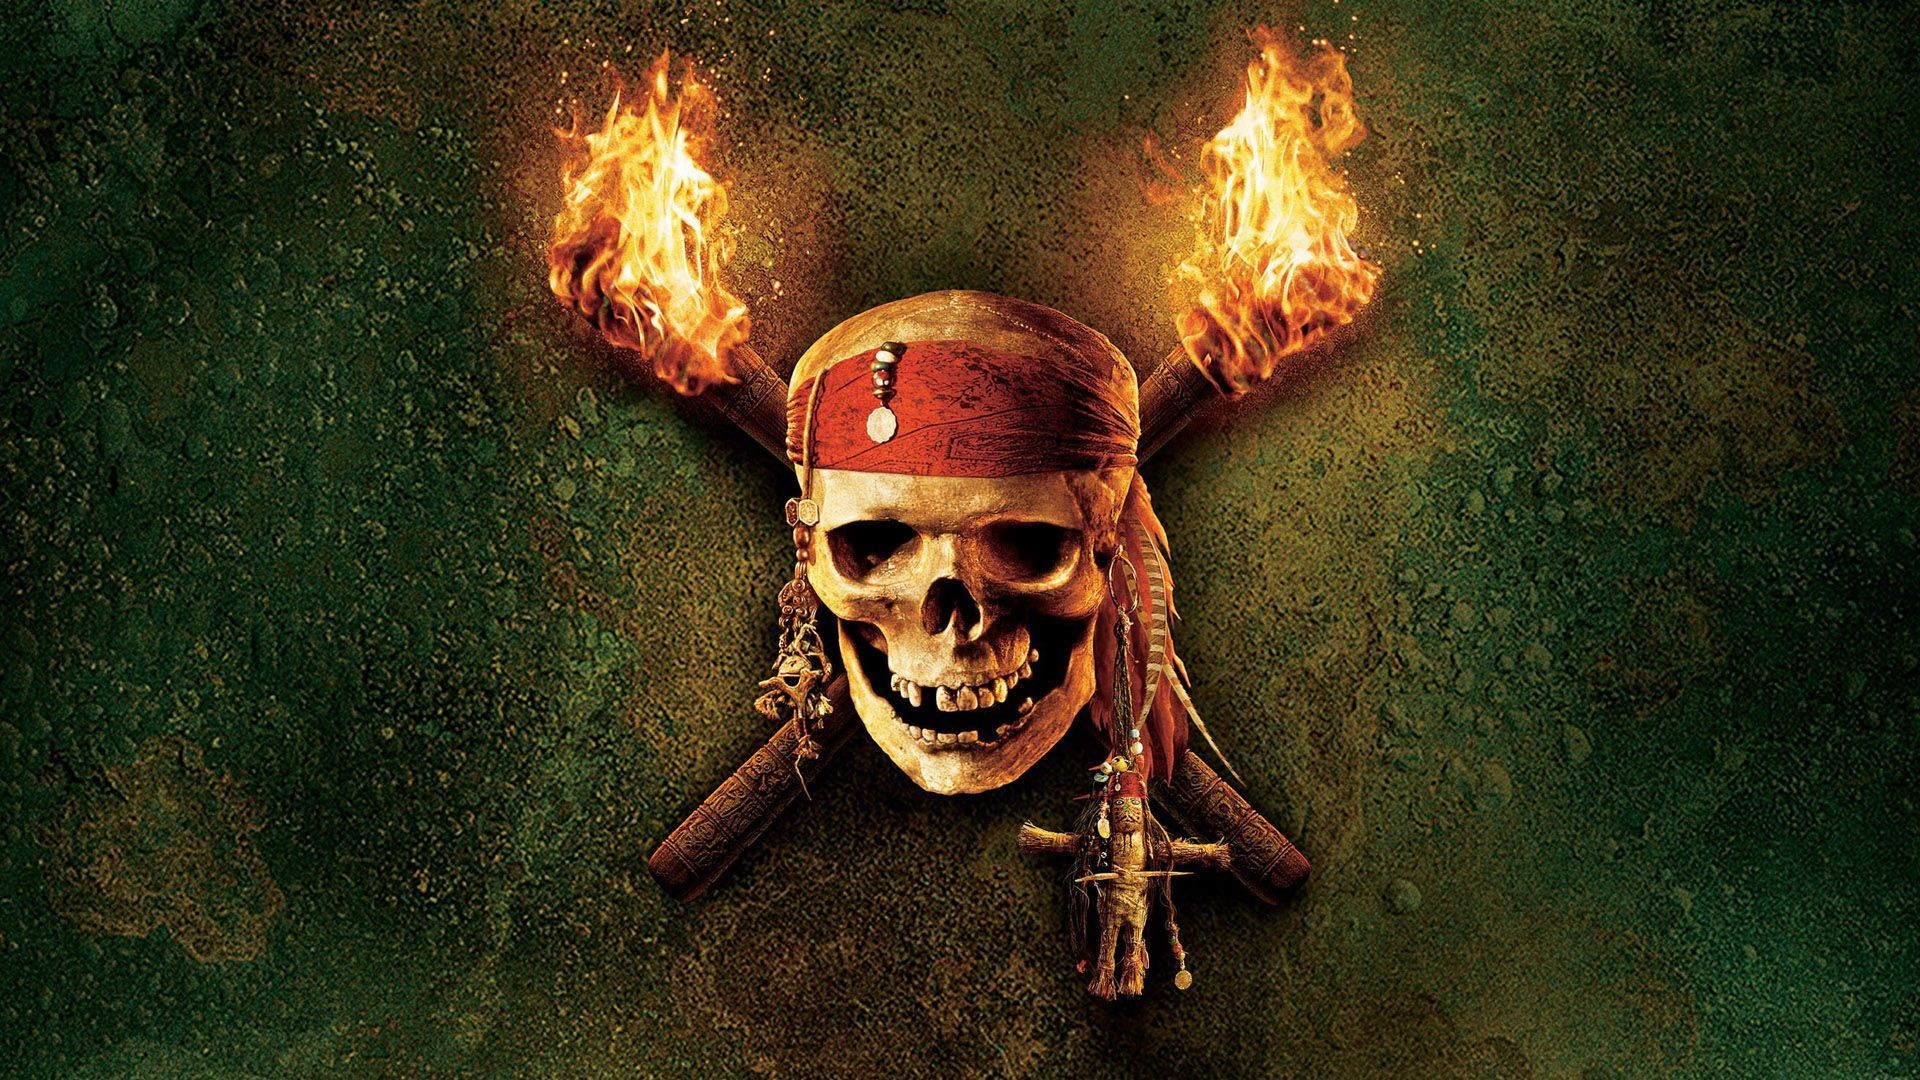 1920x1080 0 Pirates Of The Carribean Wallpapers Pirates Of The Carribean Wallpapers